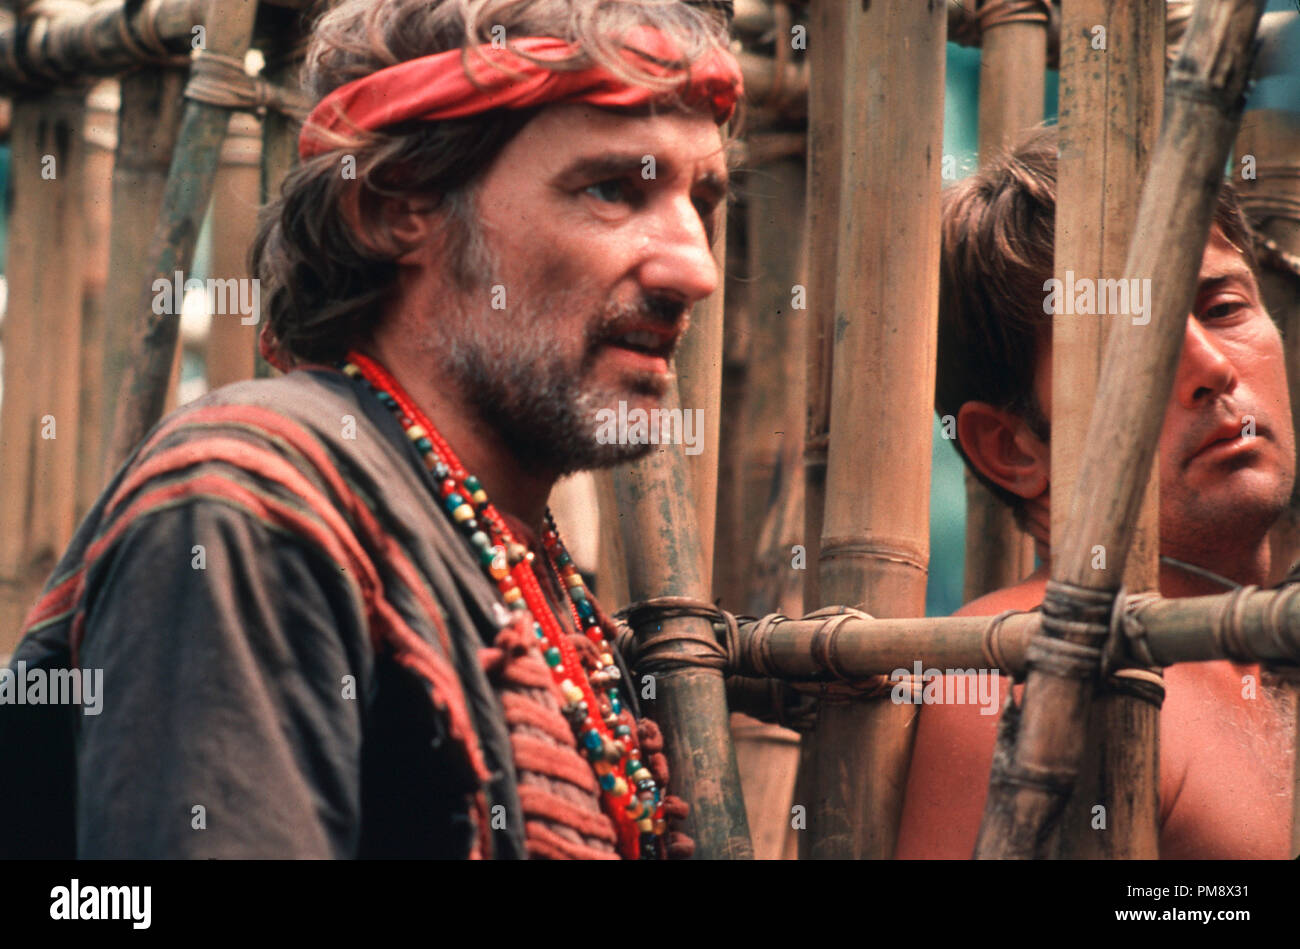 Studio Publicity Still from 'Apocalypse Now' Dennis Hopper, Martin Sheen © 1979 United Artists  All Rights Reserved File Reference # 31718164THA  For Editorial Use Only Stock Photo